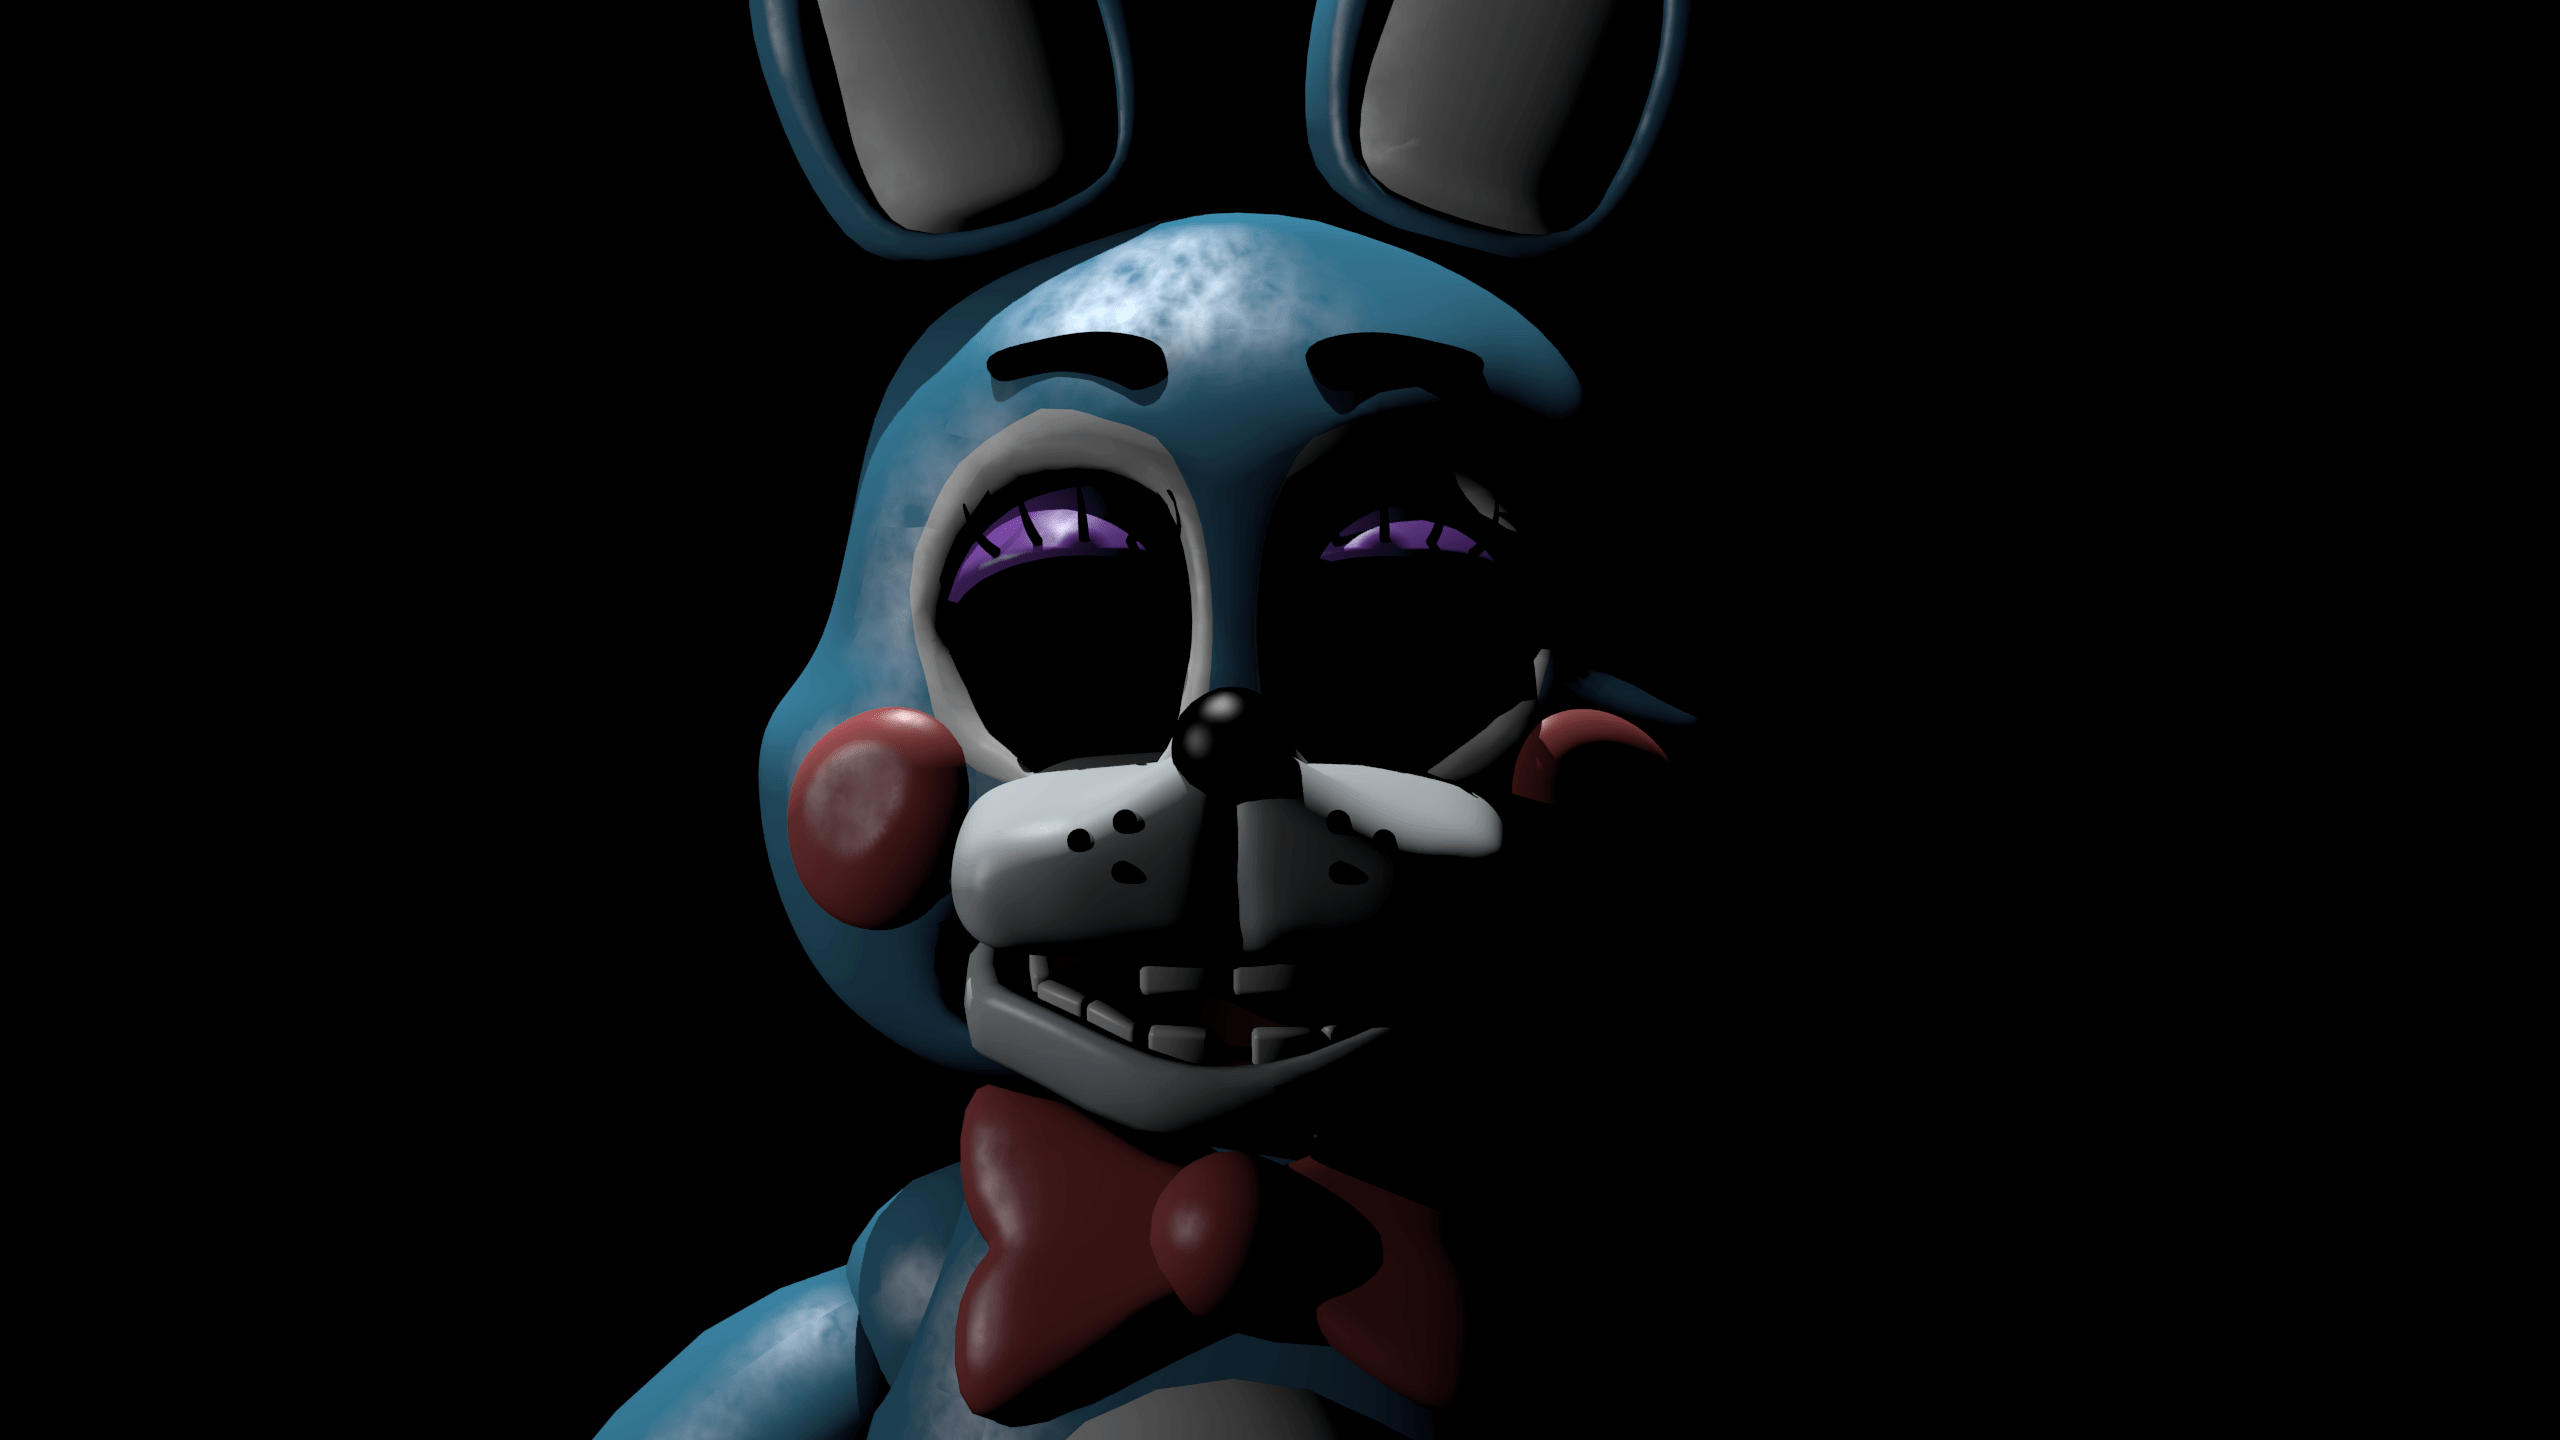 Anime Bonnie Wallpapers - Wallpaper Cave